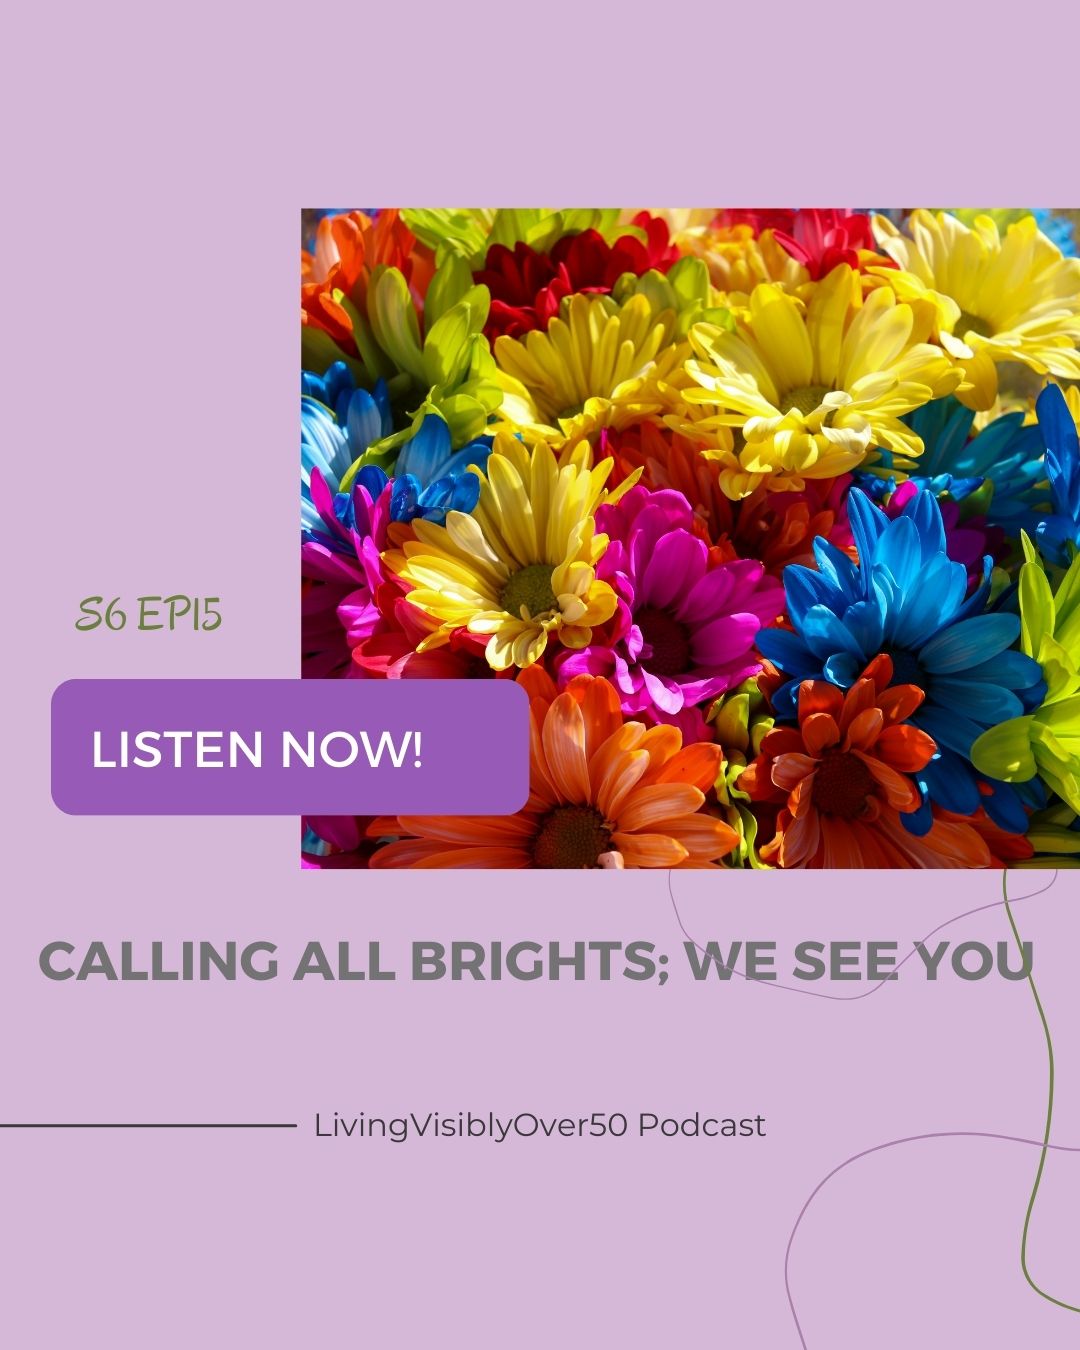 living visibly over 50 podcast | over 50